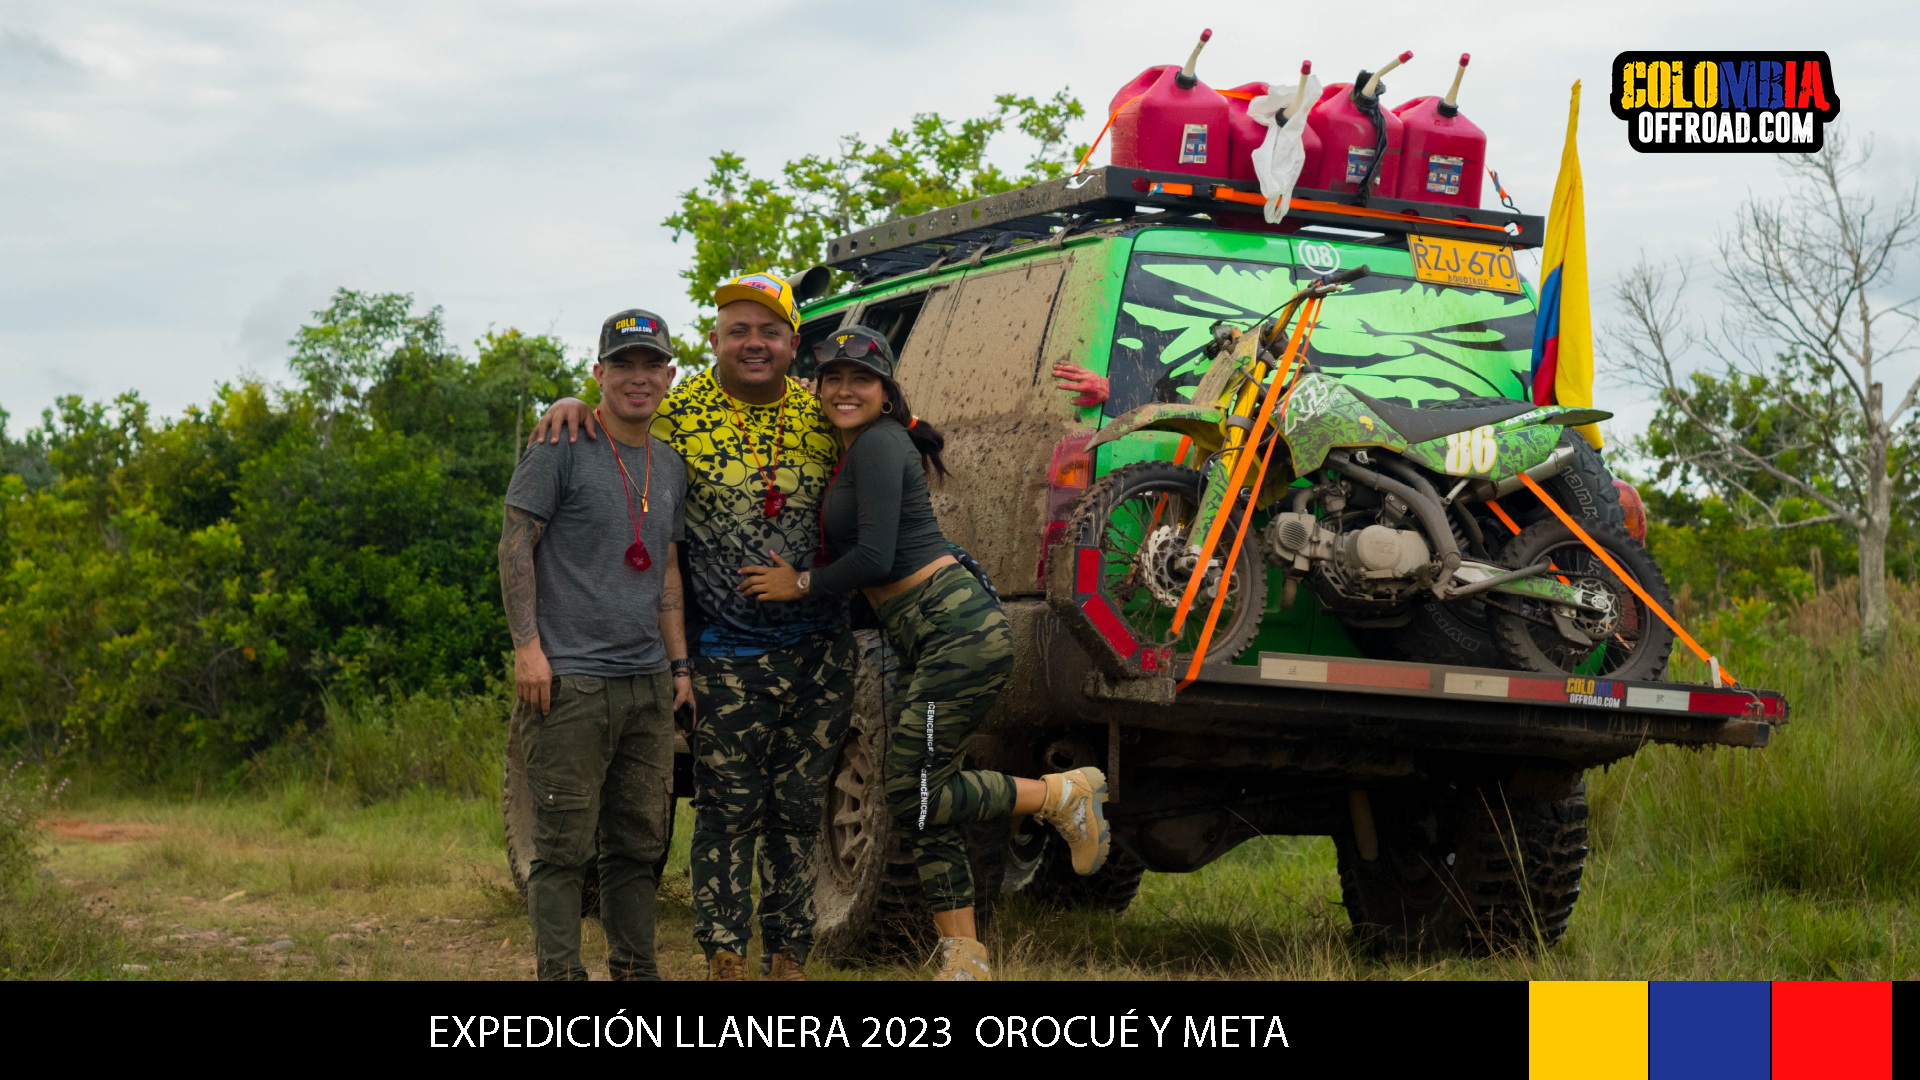 COLOMBIA OFF ROAD (3)